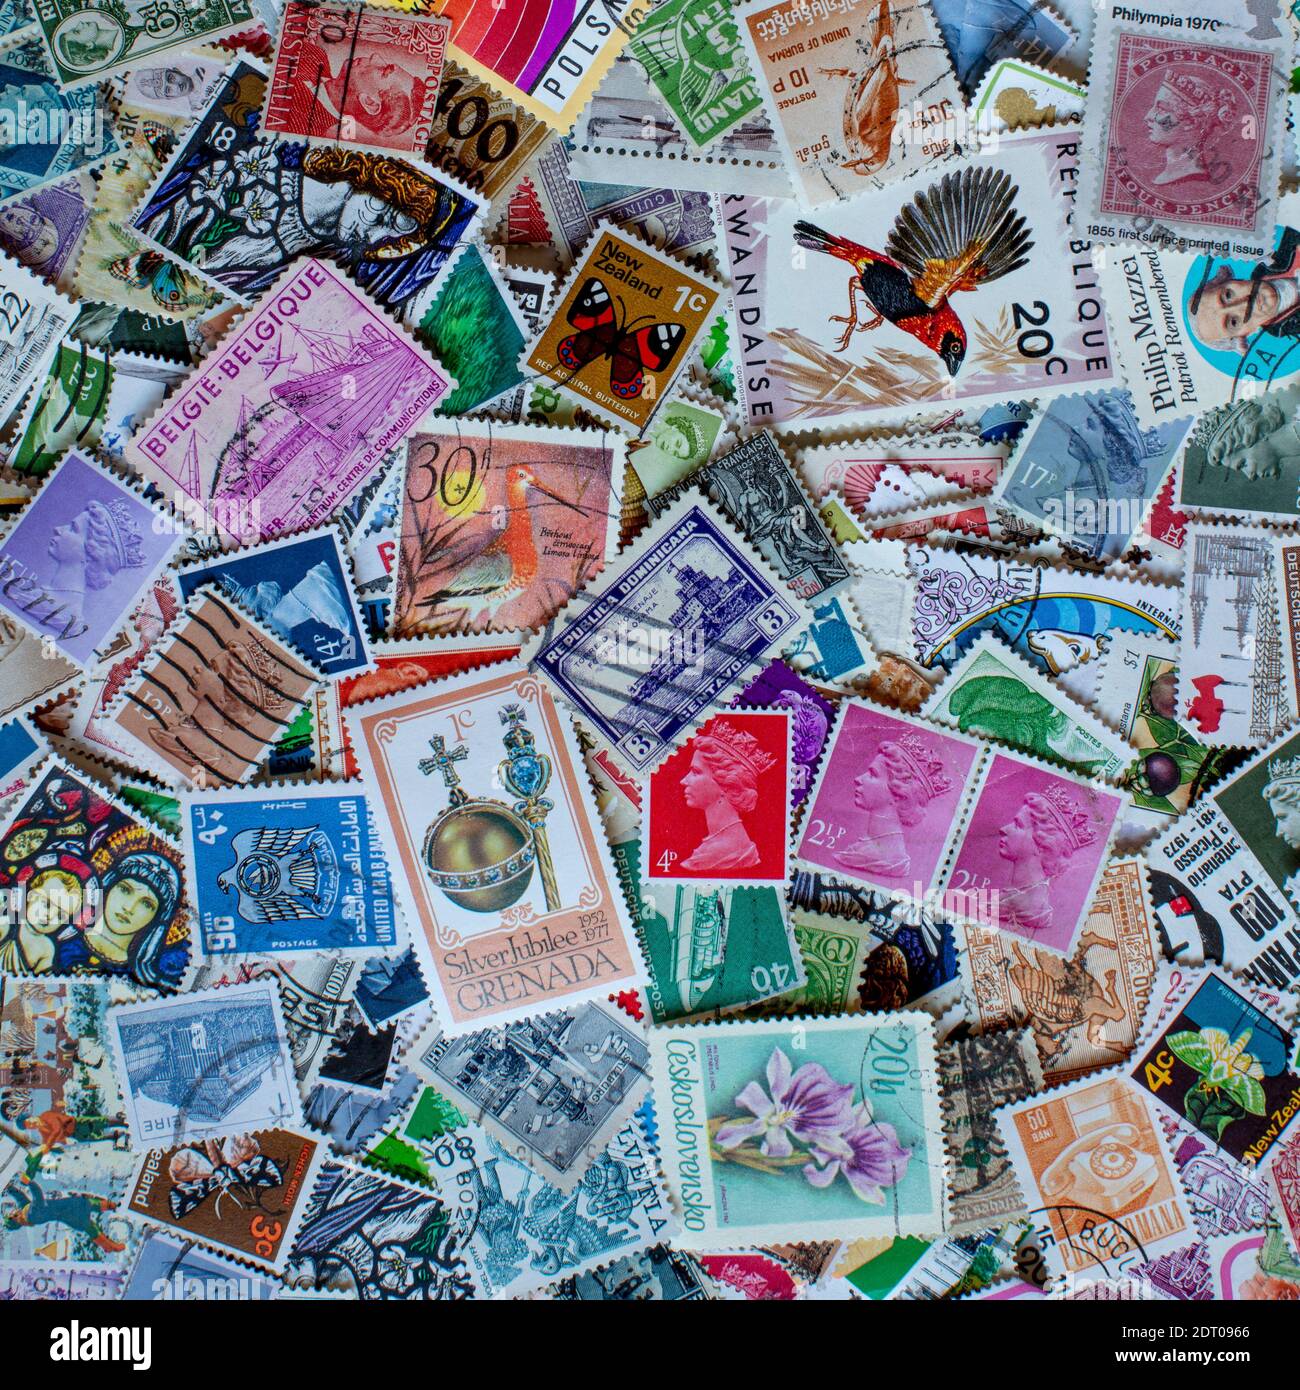 Display of international/world postage stamps as still-life collection Stock Photo